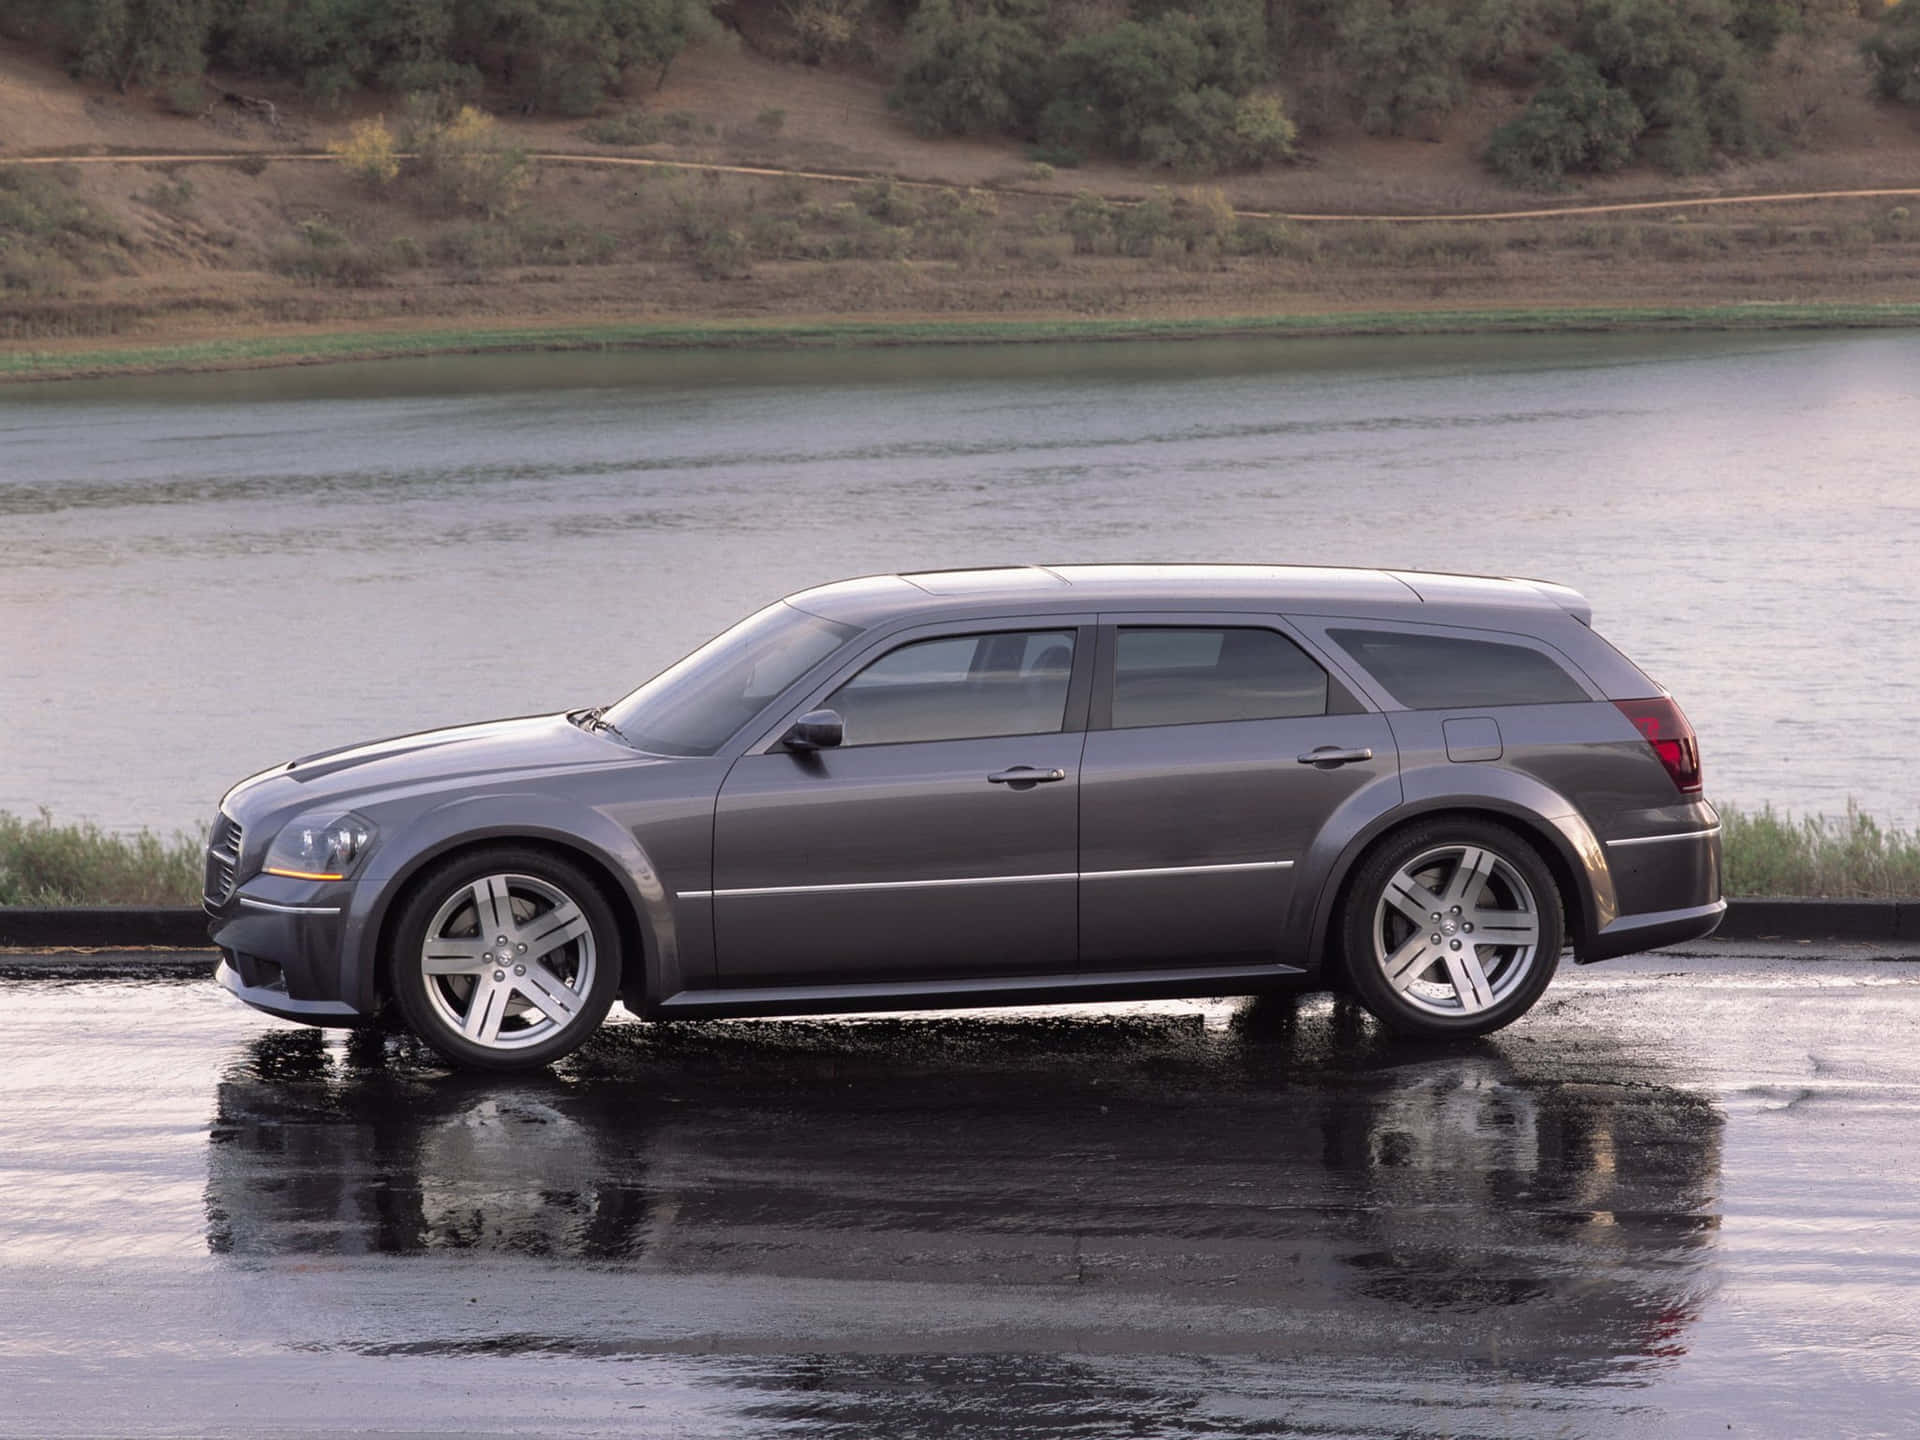 "dynamic Dodge Magnum On The Move" Wallpaper